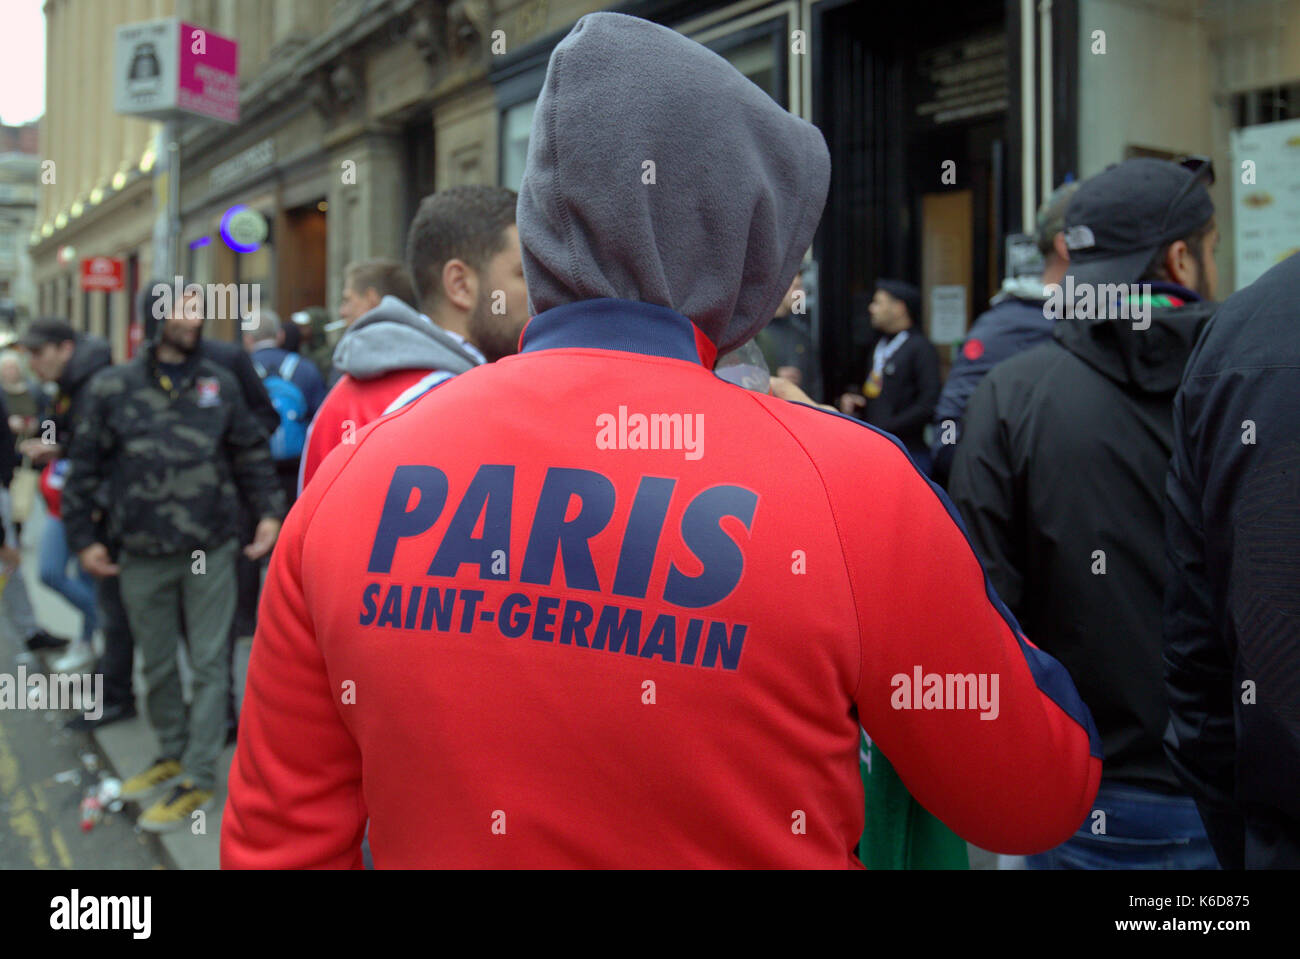 Glasgow, Scotland, UK. 12th Sep, 2017. Paris Saint-Germain Football Club, commonly known as PSG play Glasgow Celtic in the Champions league tonight. PSG ultra fans remain under close scrutiny from police Scotland as they tahe over the sidewalk near a pub on George square . Credit: gerard ferry/Alamy Live News Stock Photo